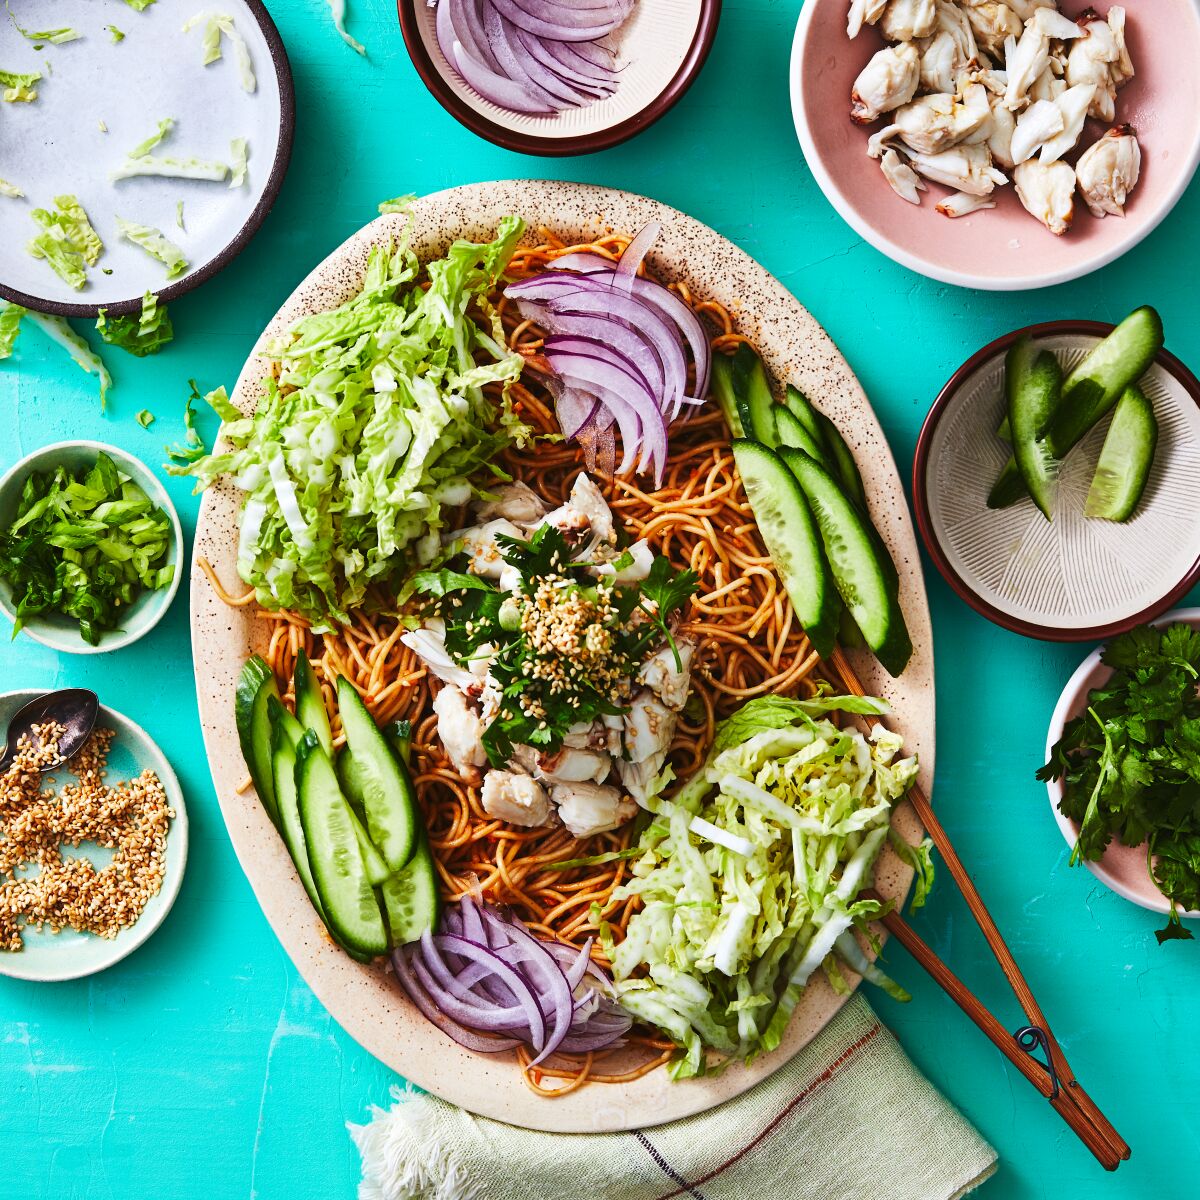 Chilled Sichuan noodles maintain all their chile warmth, without the chile sting, when made at home with chile crisp and sesame paste in the dressing and loads of crunchy vegetables and creamy crab on top. Prop styling by Nidia Cueva.